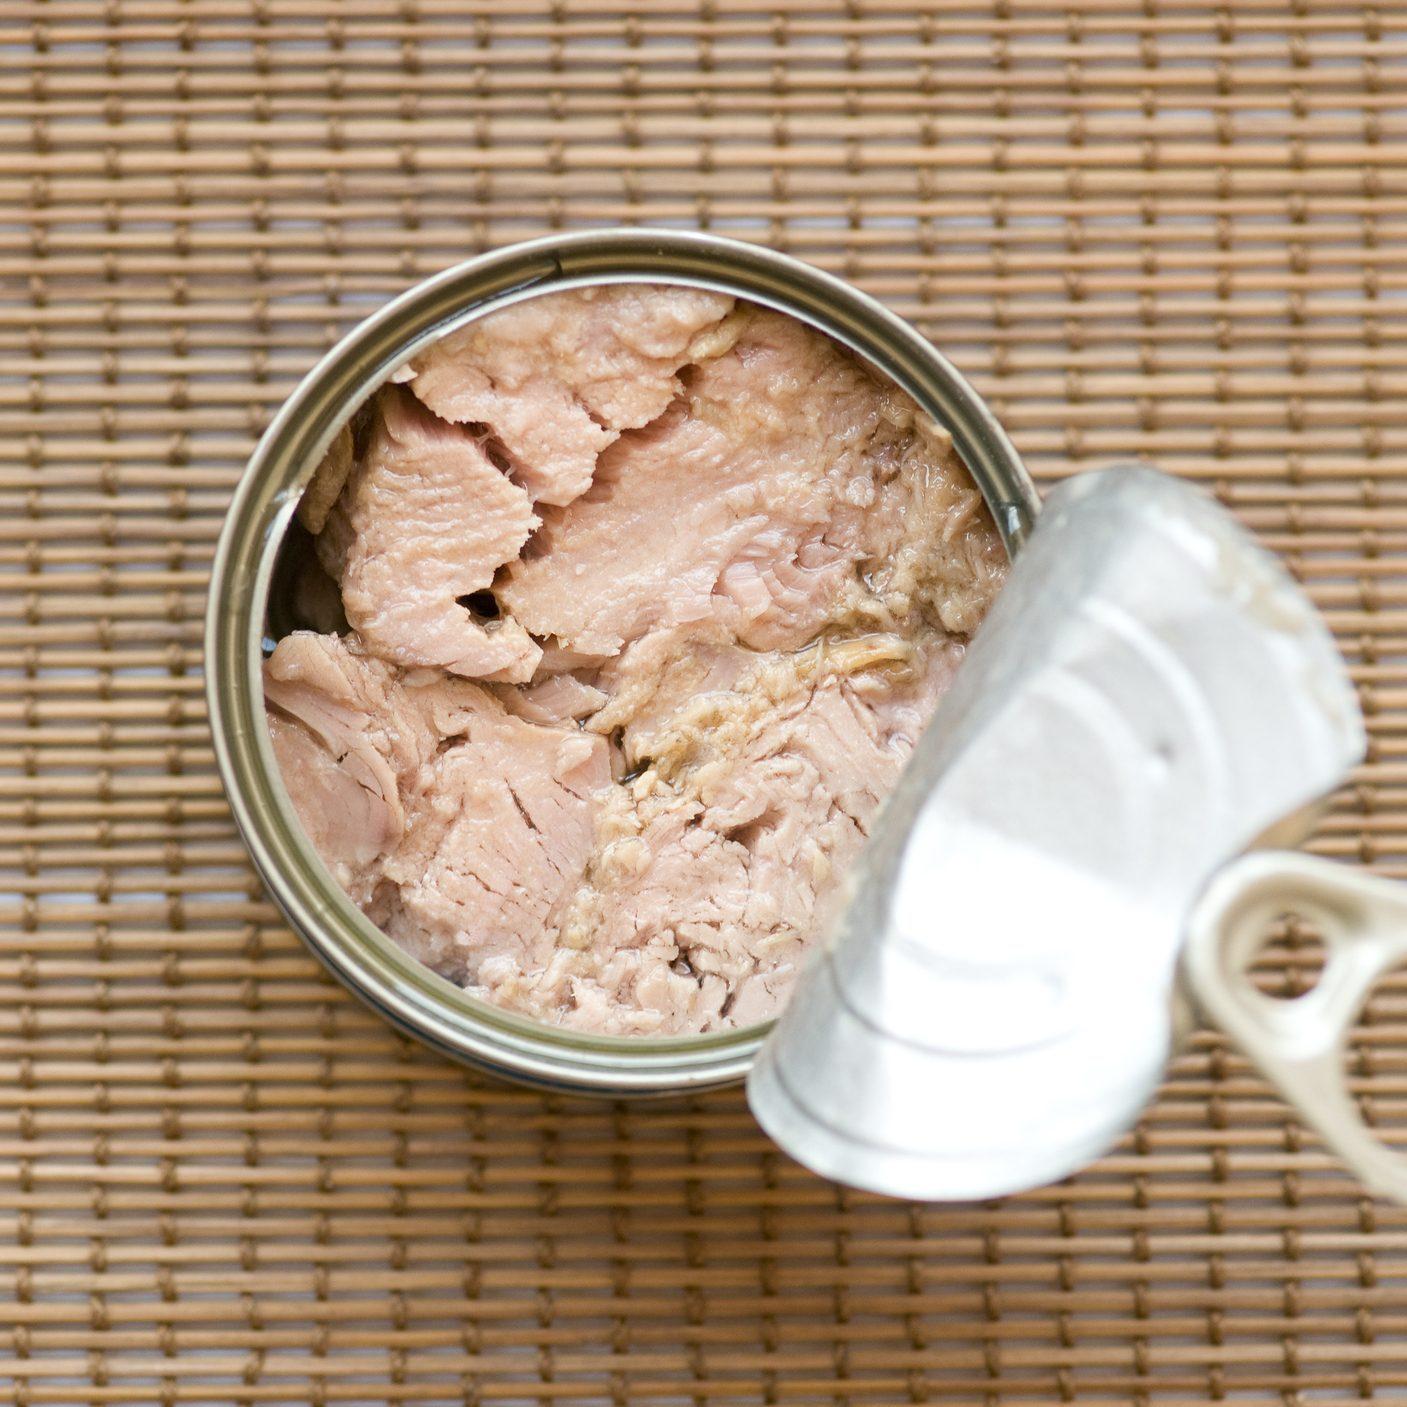 Is Canned Tuna Healthy? Tuna Benefits You Should Know The Healthy